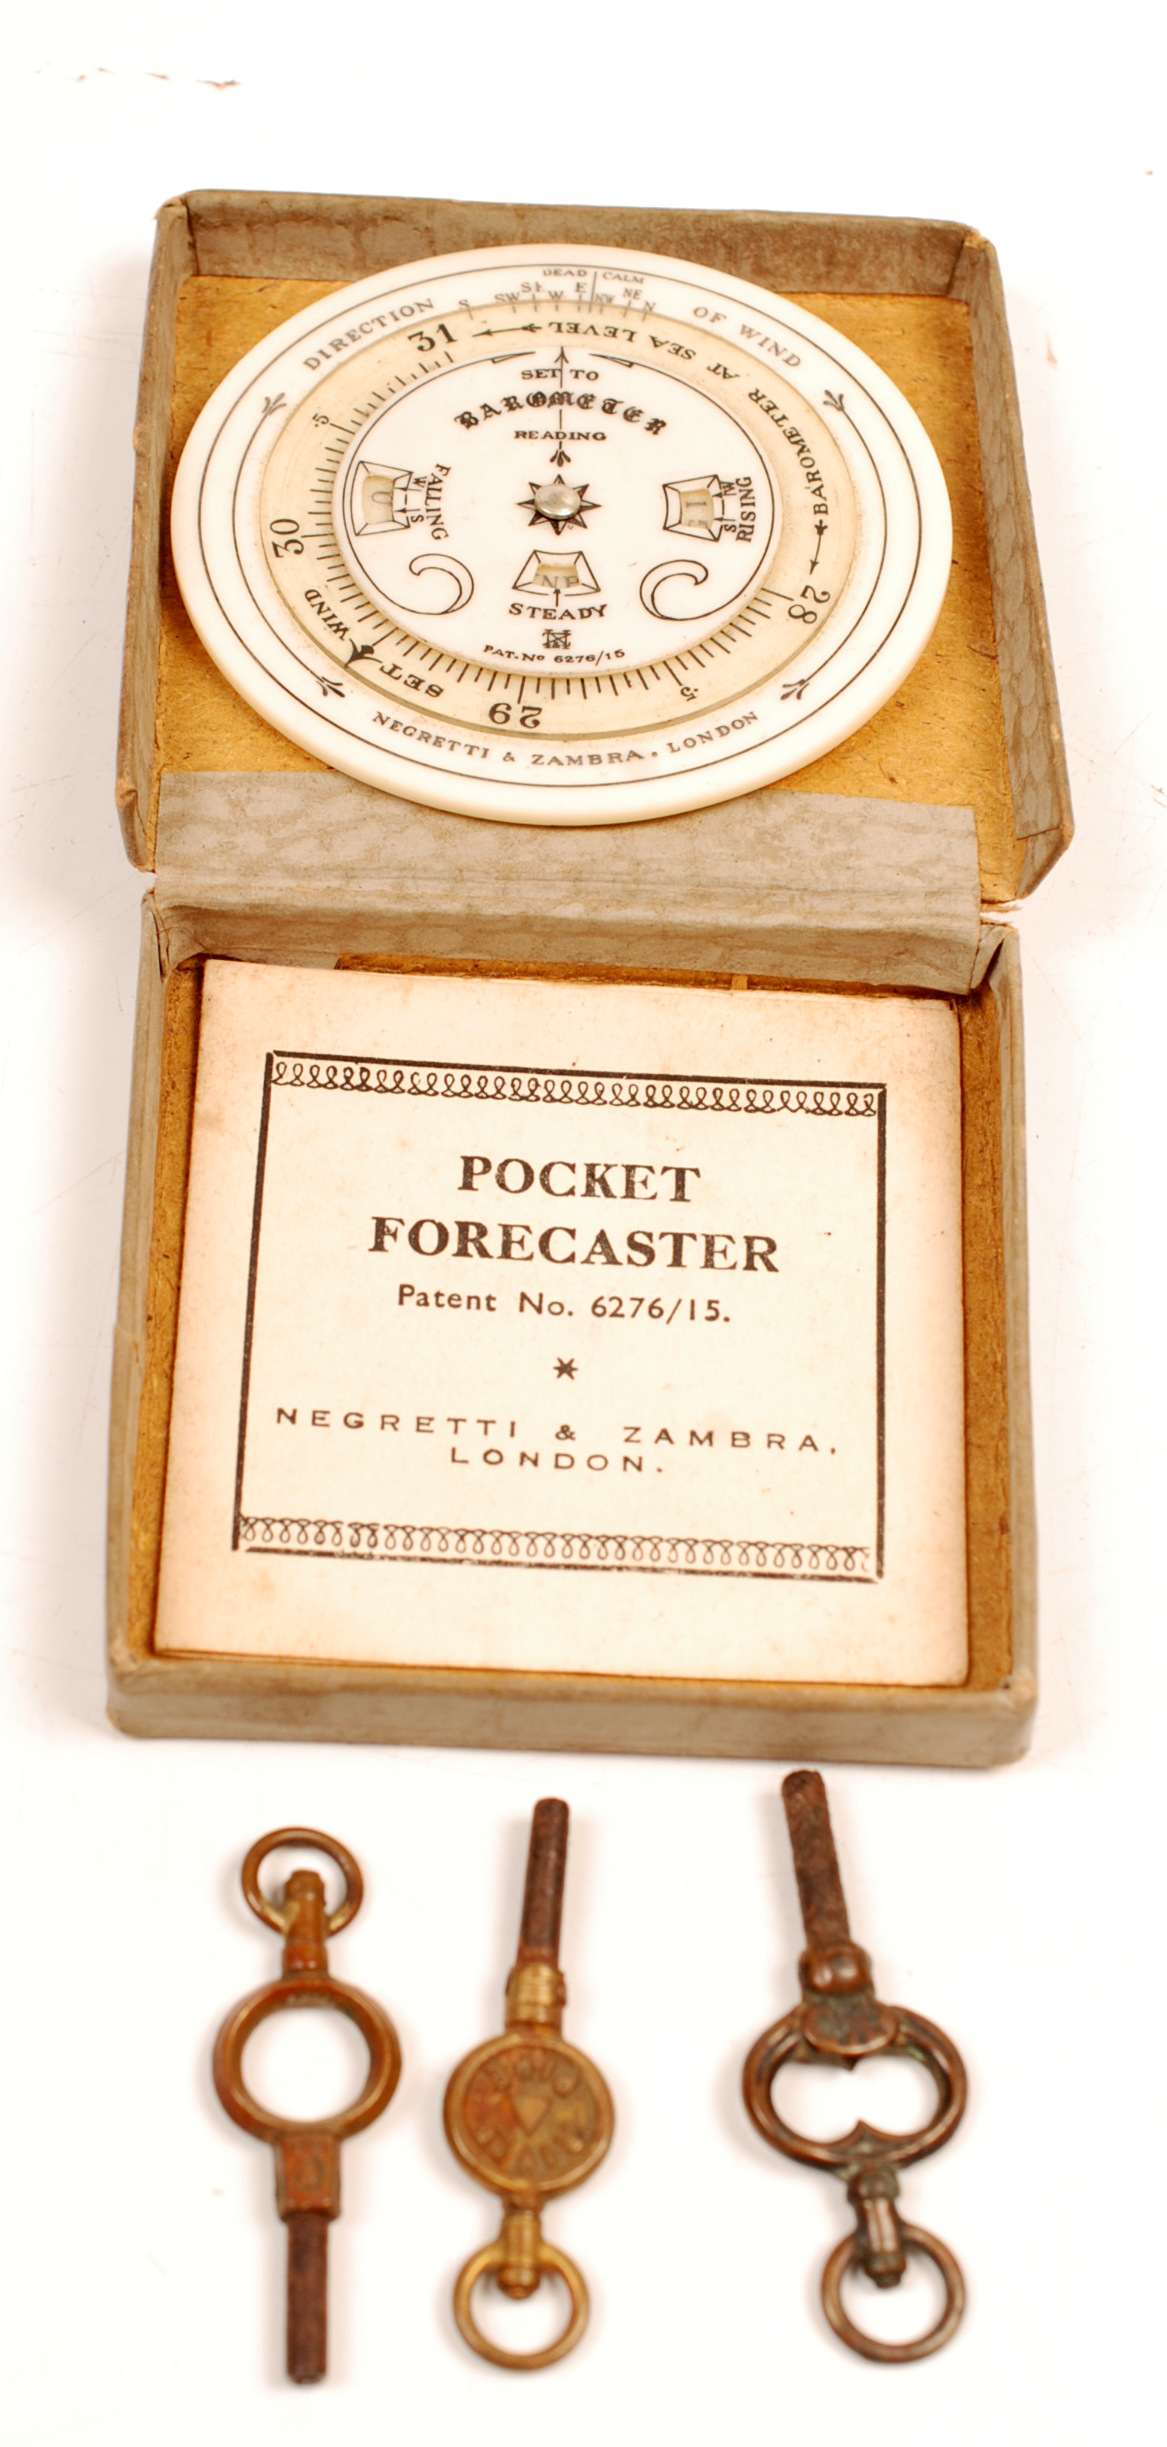 A Negretti & Zambra, London circular ivorine "Pocket Forecaster" with its instructions and in its